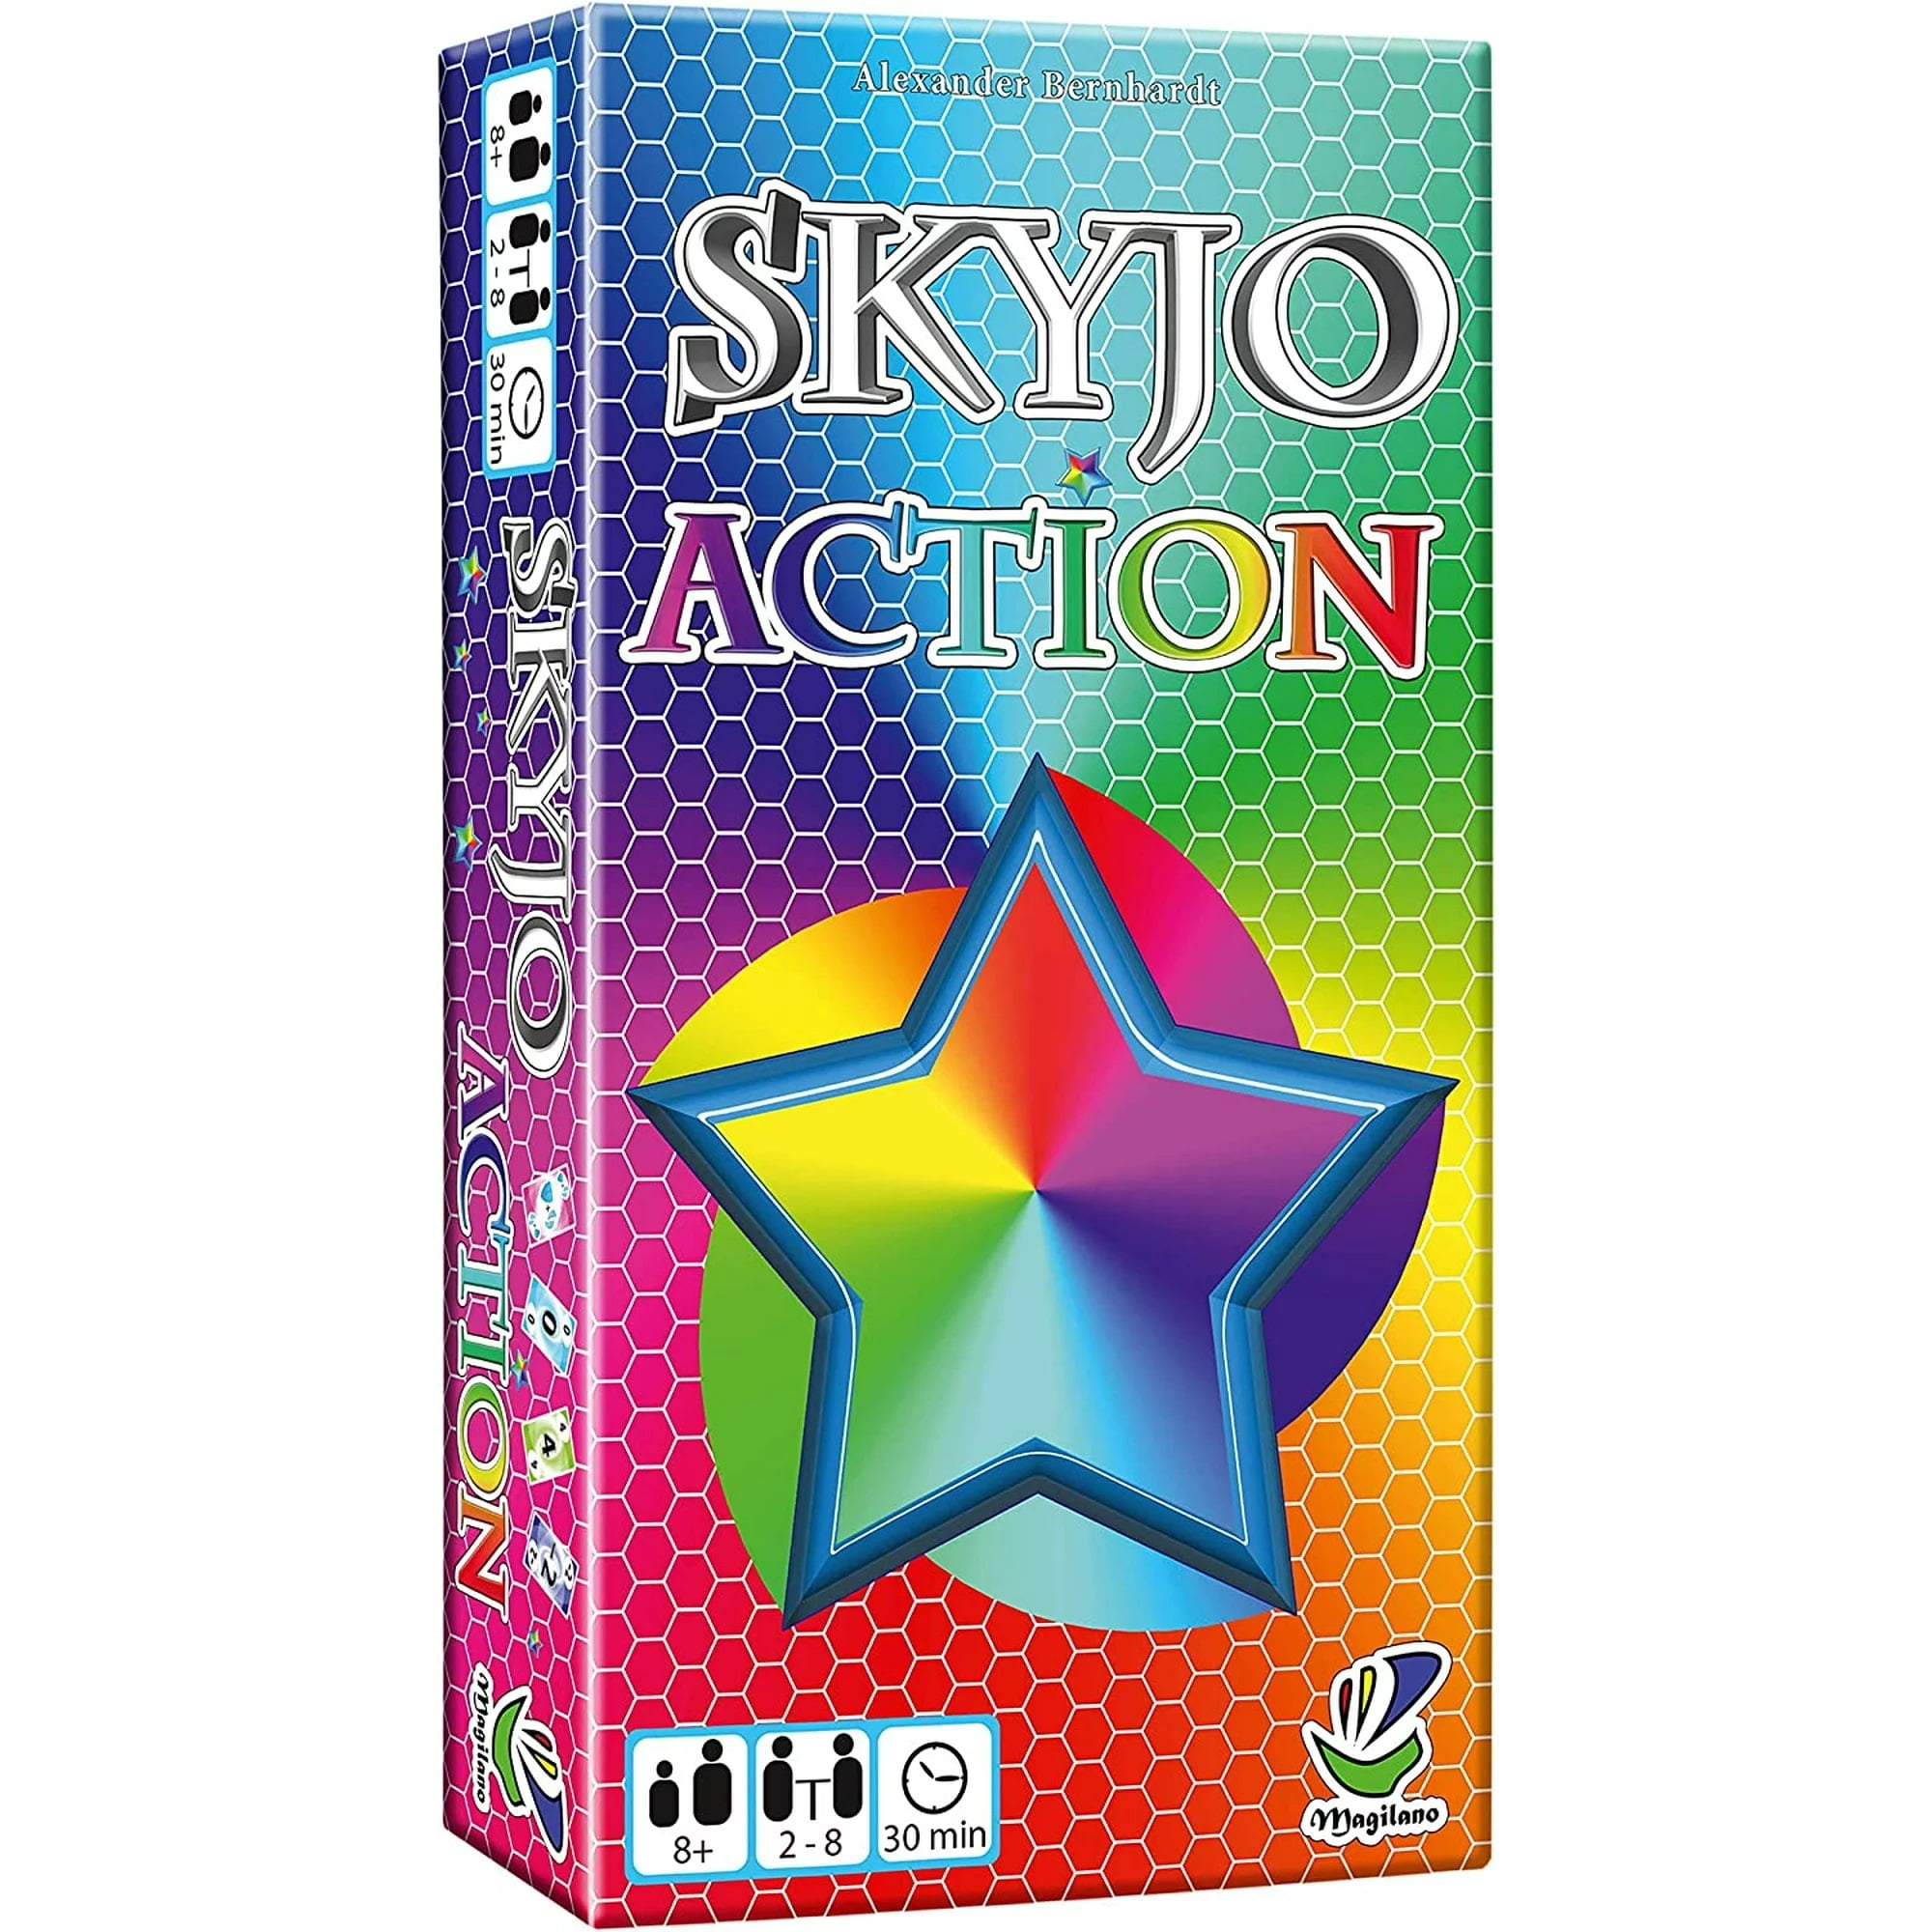 SKYJO ACTION, Exciting Card Games, Fun Game Nights with Friends and Family  (English Version)